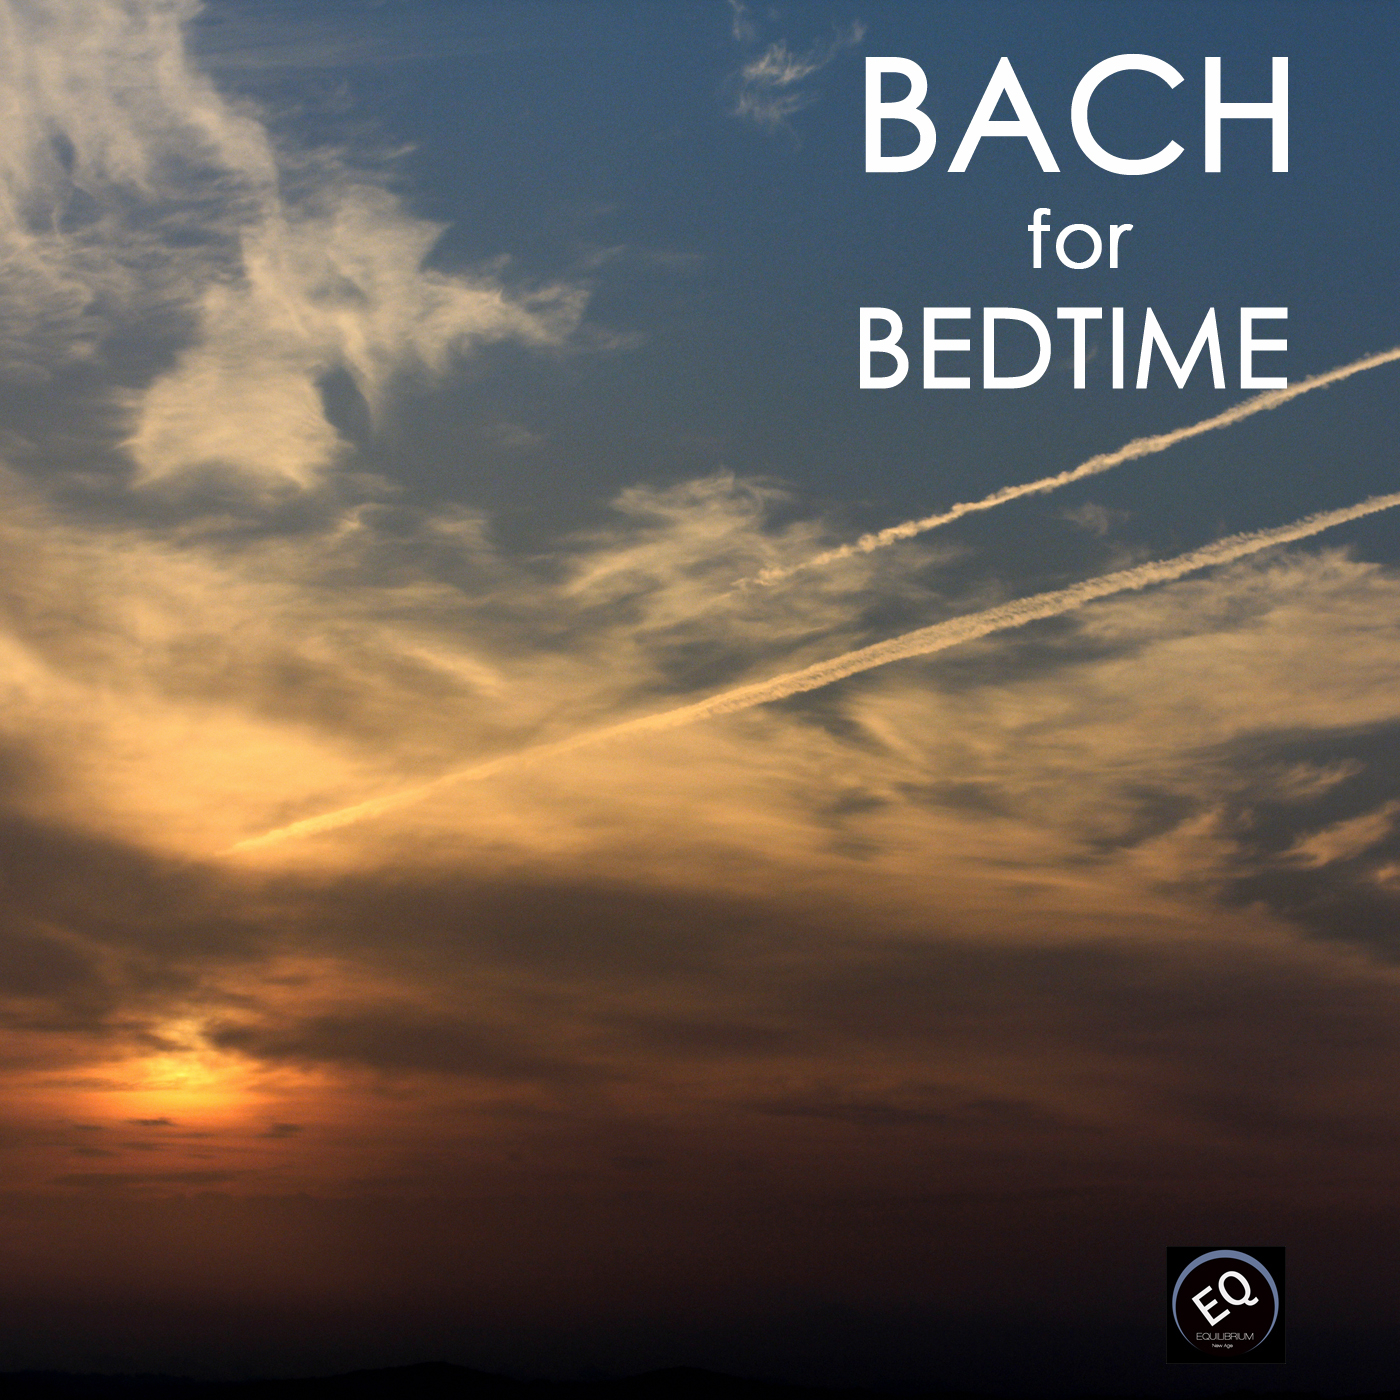 Bach Cantatas Ich ruf BWV 639 with Gentle River Stream Nature Sounds, Sounds of Nature Music for Sleep